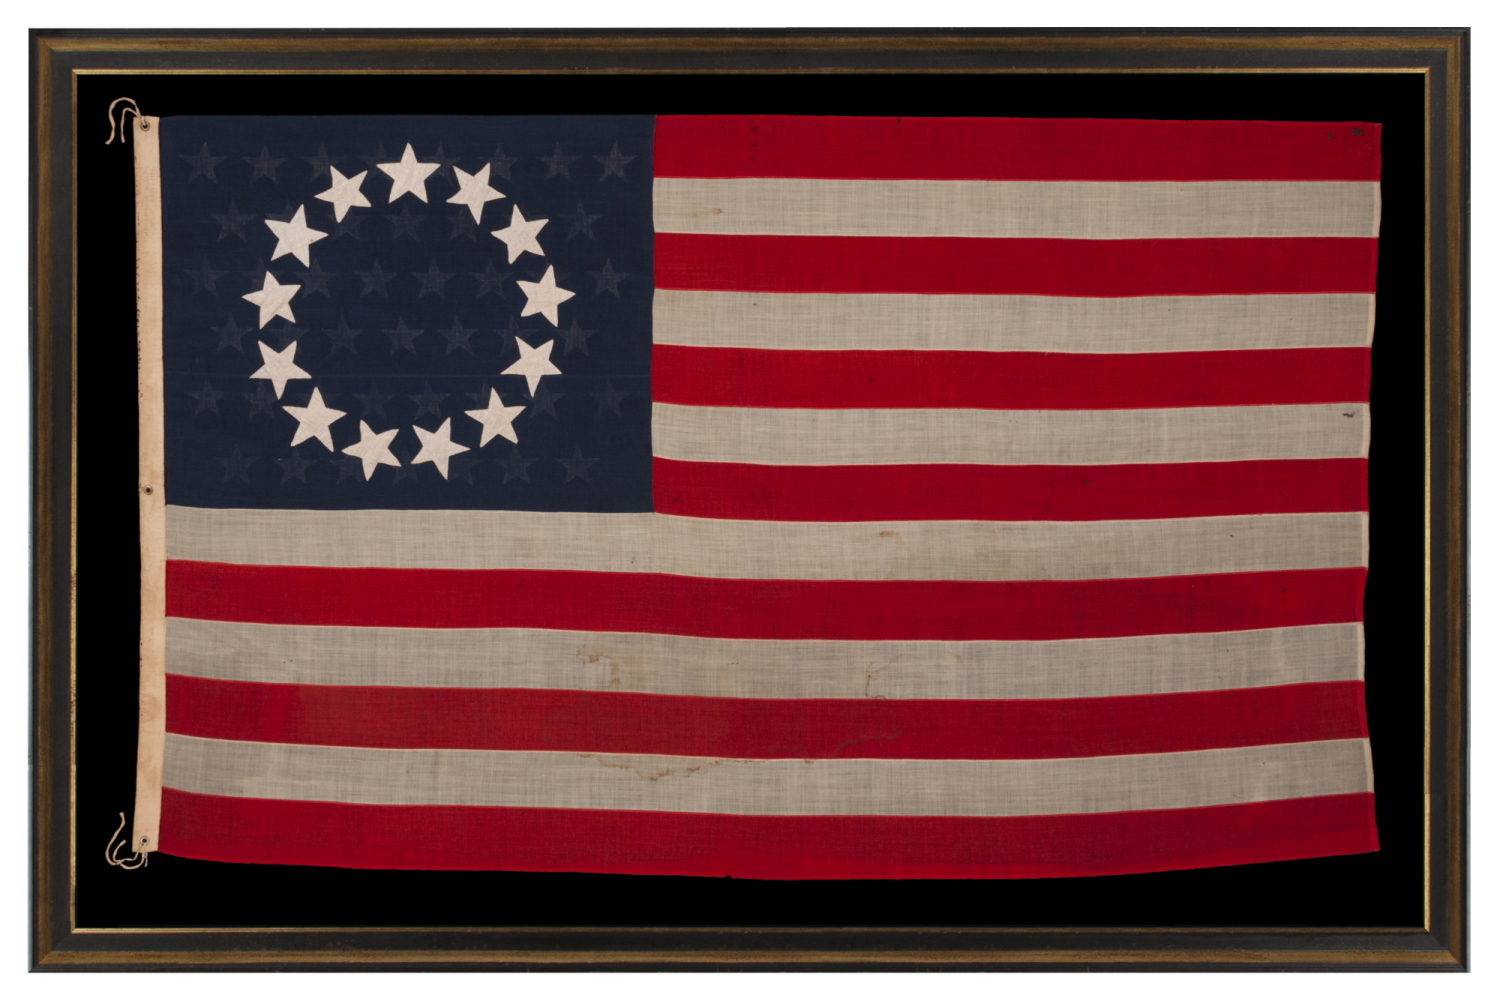 13 STARS IN THE BETSY ROSS PATTERN, WITH 45 STARS ON THE REVERSE; ON AN ANTIQUE AMERICAN FLAG MADE AND SIGNED BY A PREVIOUSLY UNIDENTIFIED FLAG-MAKER, ANNIE MAC LACHLAN OF JERSEY CITY, NEW JERSEY, circa 1896-1908; A RARE AND INTERESTING EXAMPLE, IN A LARGE SCALE AMONG EARLY 13 STAR FLAGS IN THIS DESIGN